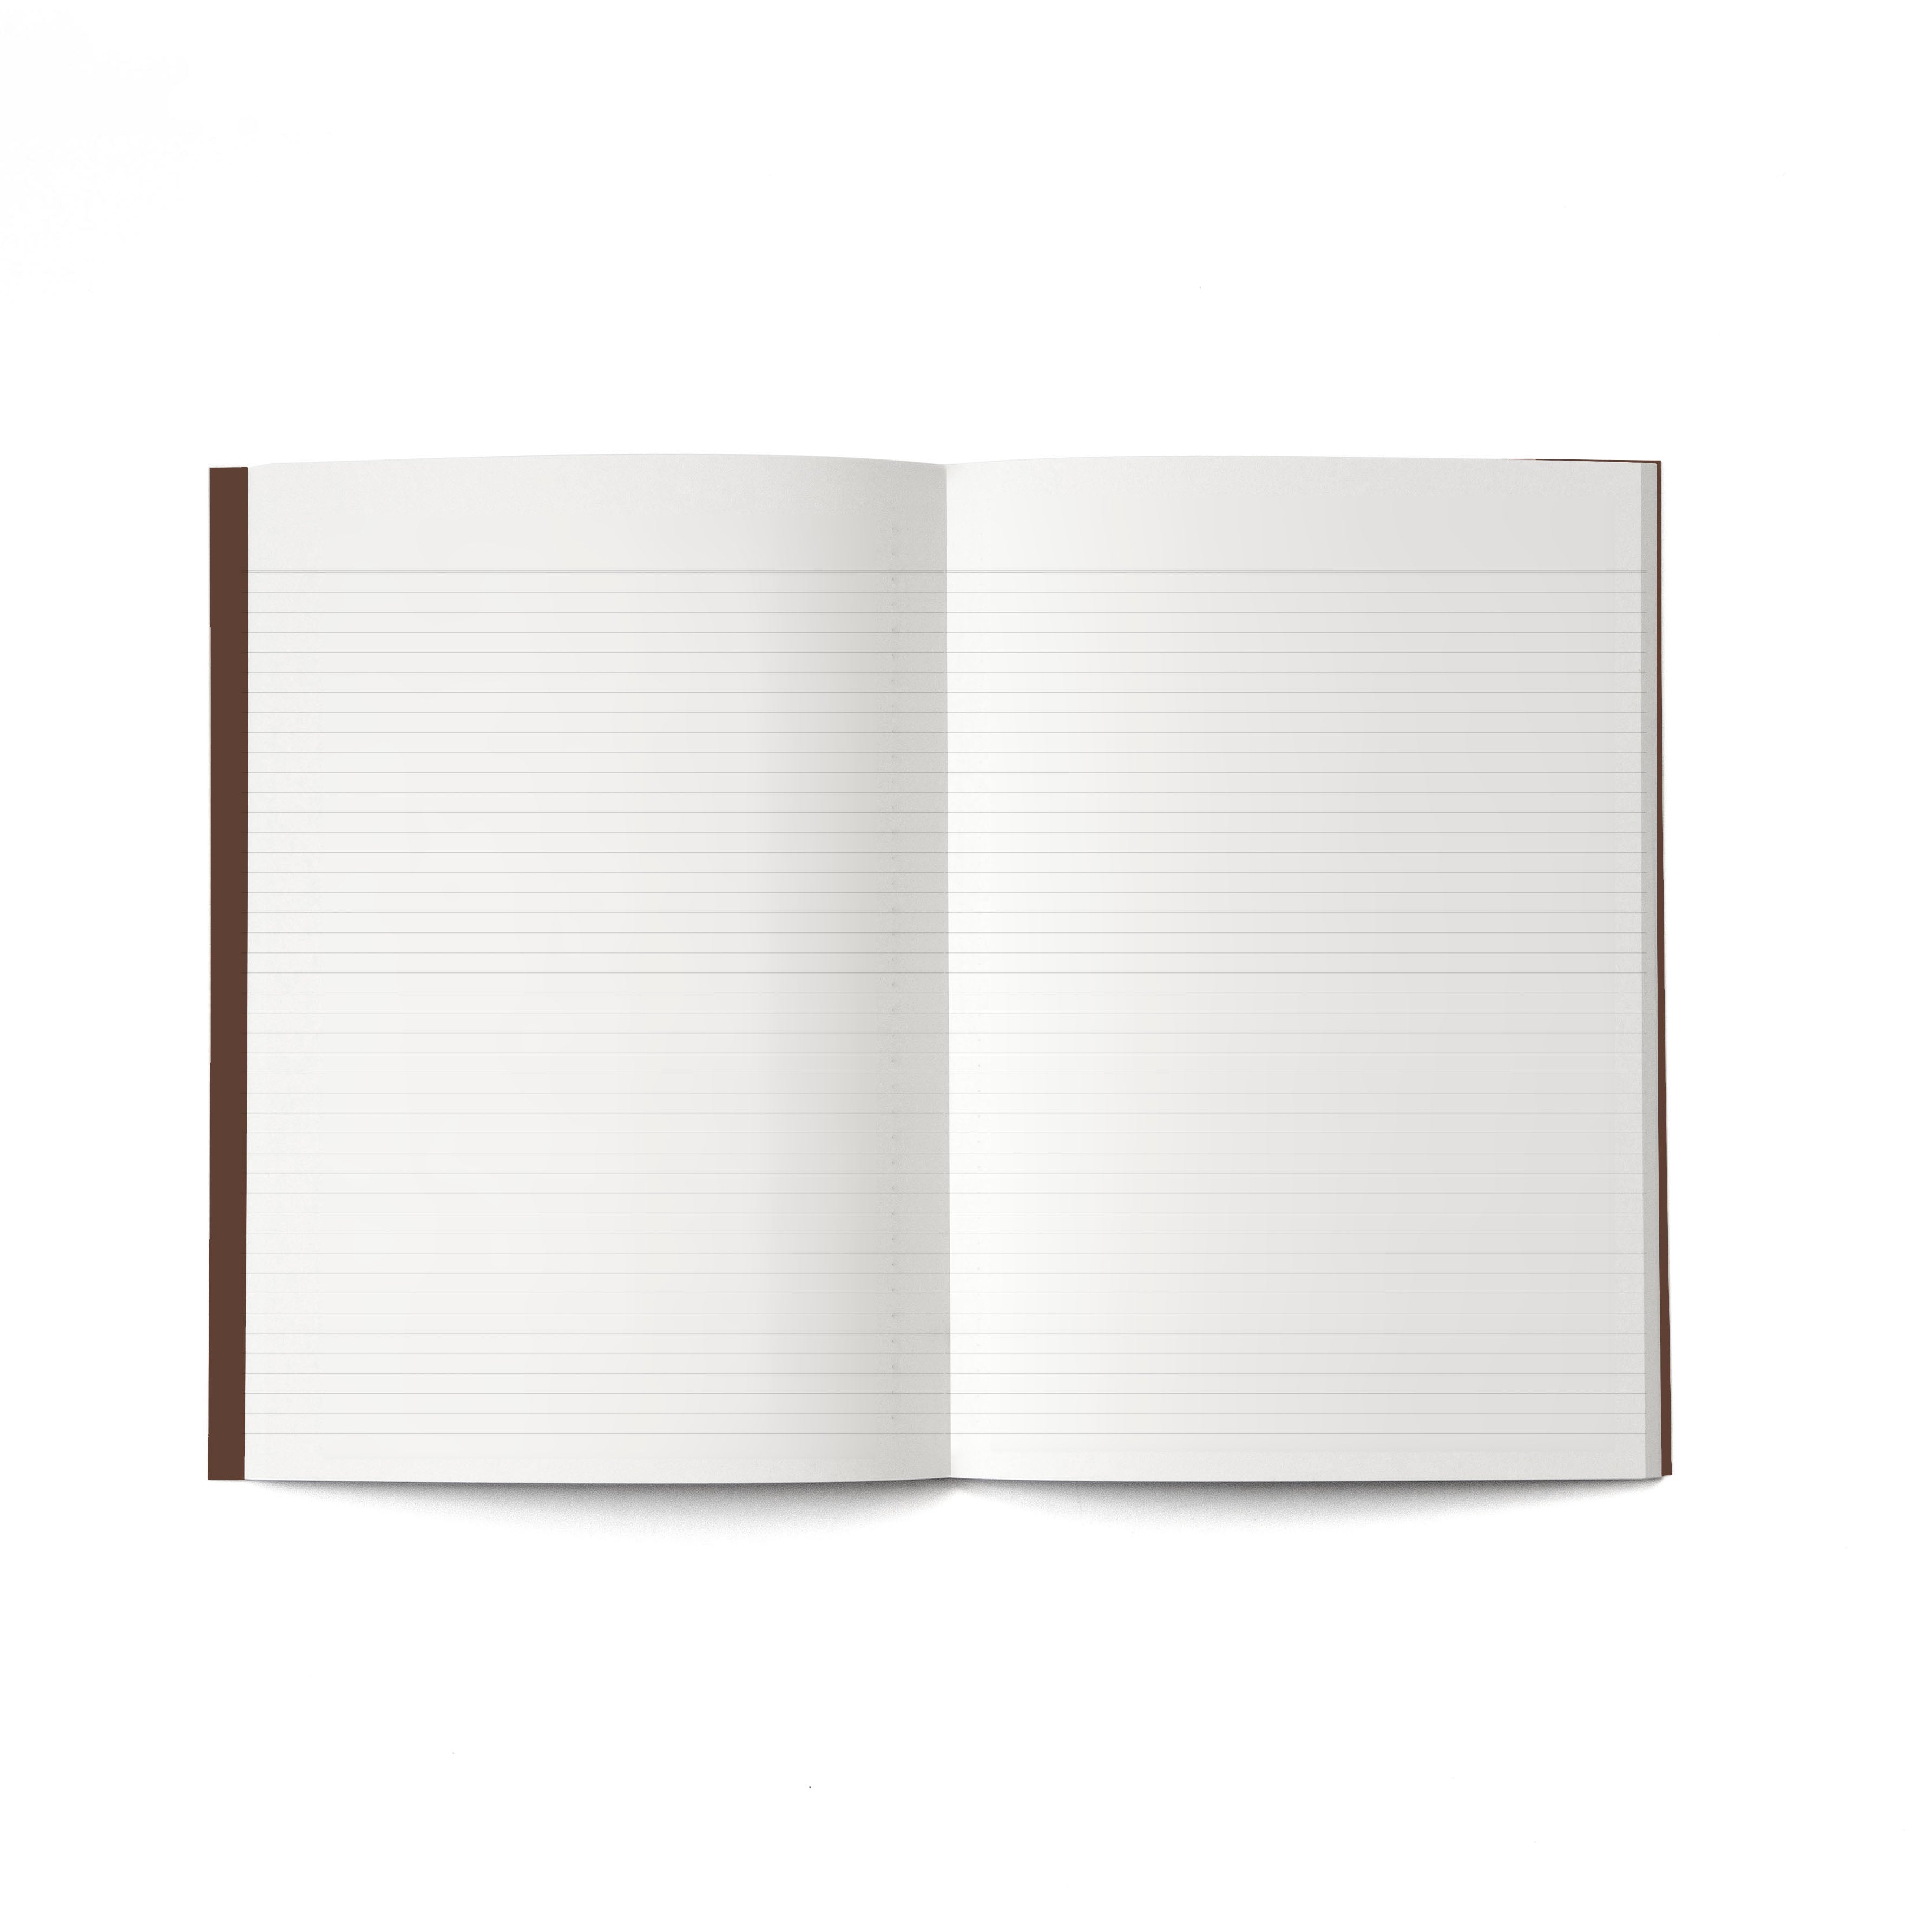 Octàgon Design, 2025 Big monthly planner plus A4 size, two pages for notes.